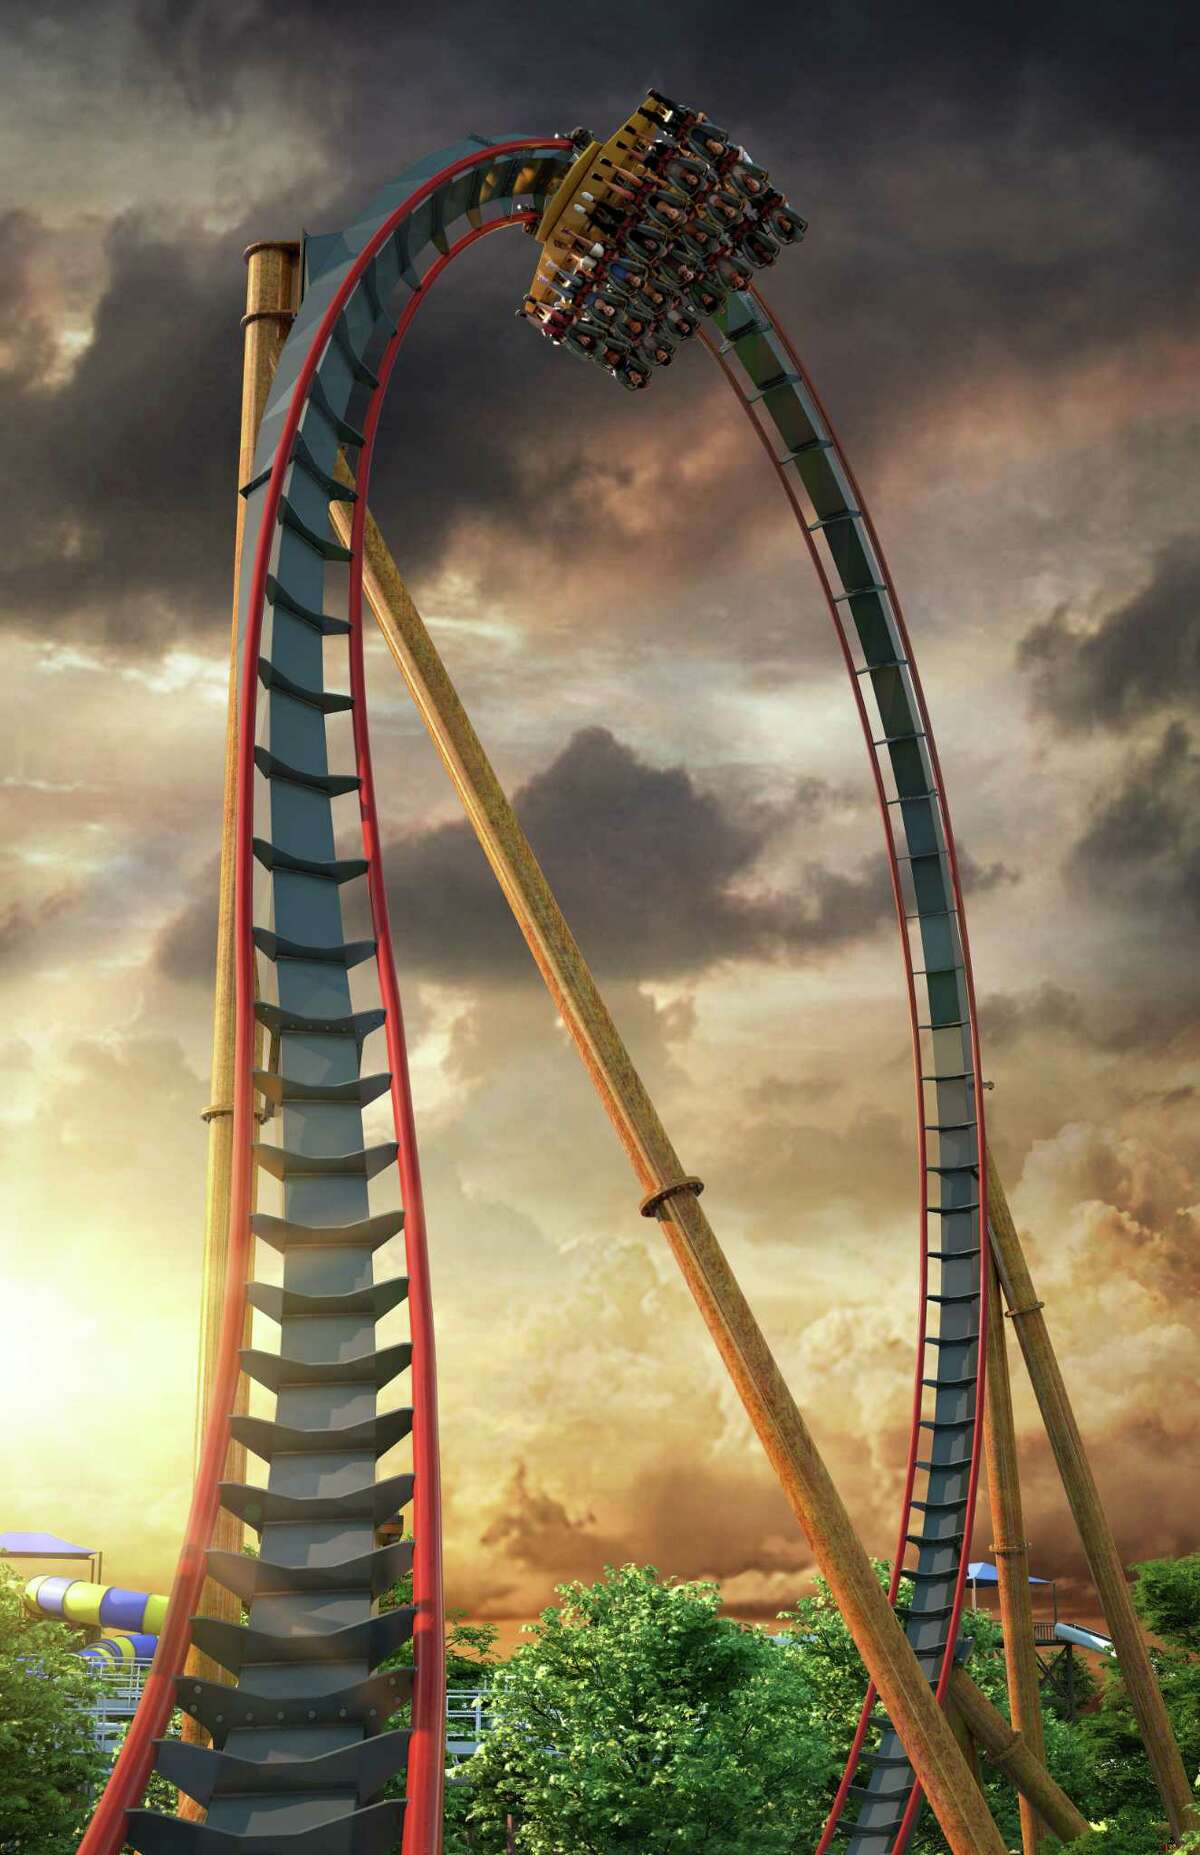 Coaster Is King Six Flags Unveils New San Antonio Ride As It Works To Boost Post Pandemic Rebound